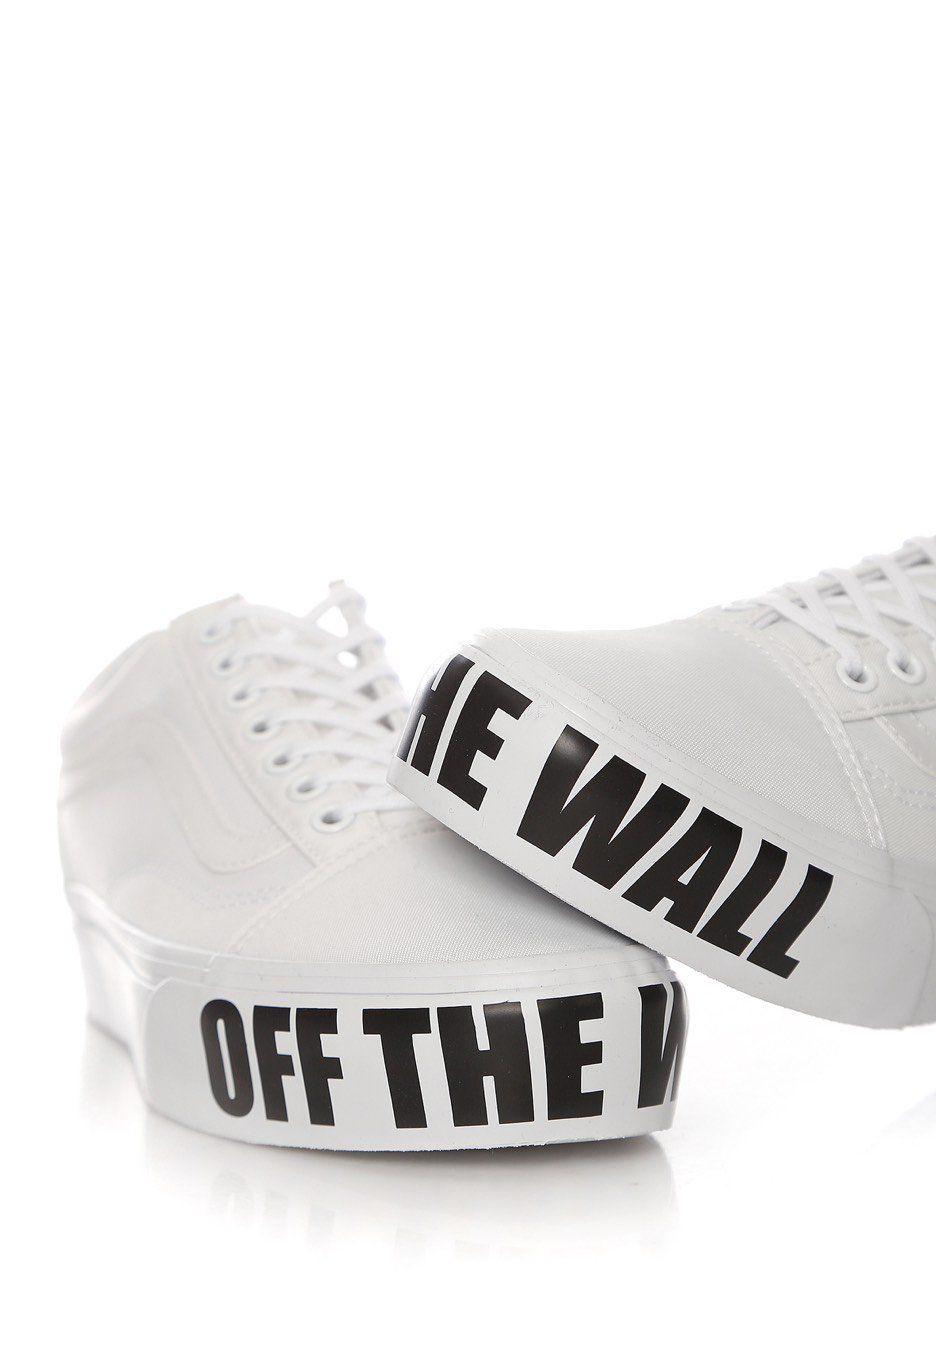 Off the Wall Vans Shoes Logo - Vans - Old Skool Platform Off The Wall - Girl Shoes - Impericon.com UK